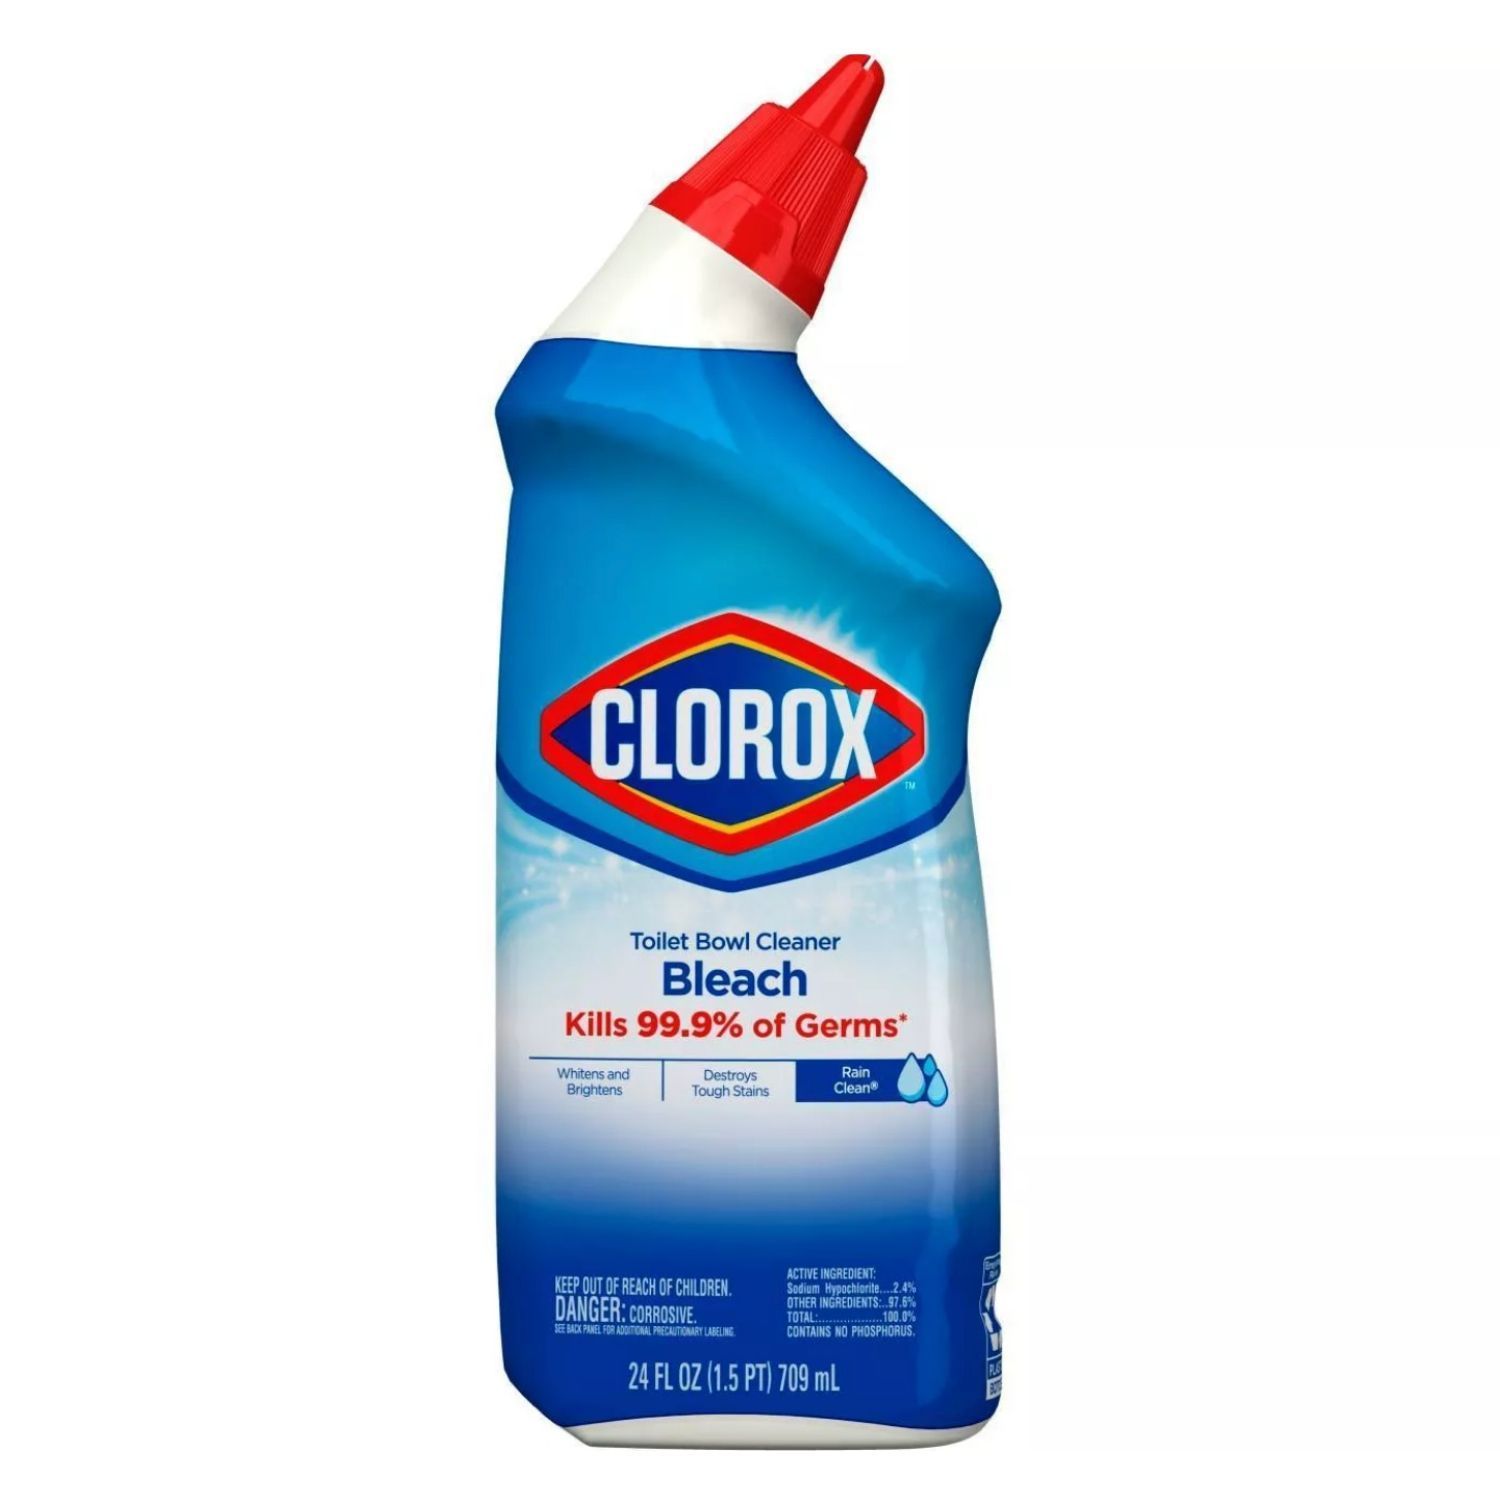 Toilet Bowl Cleaner with Bleach